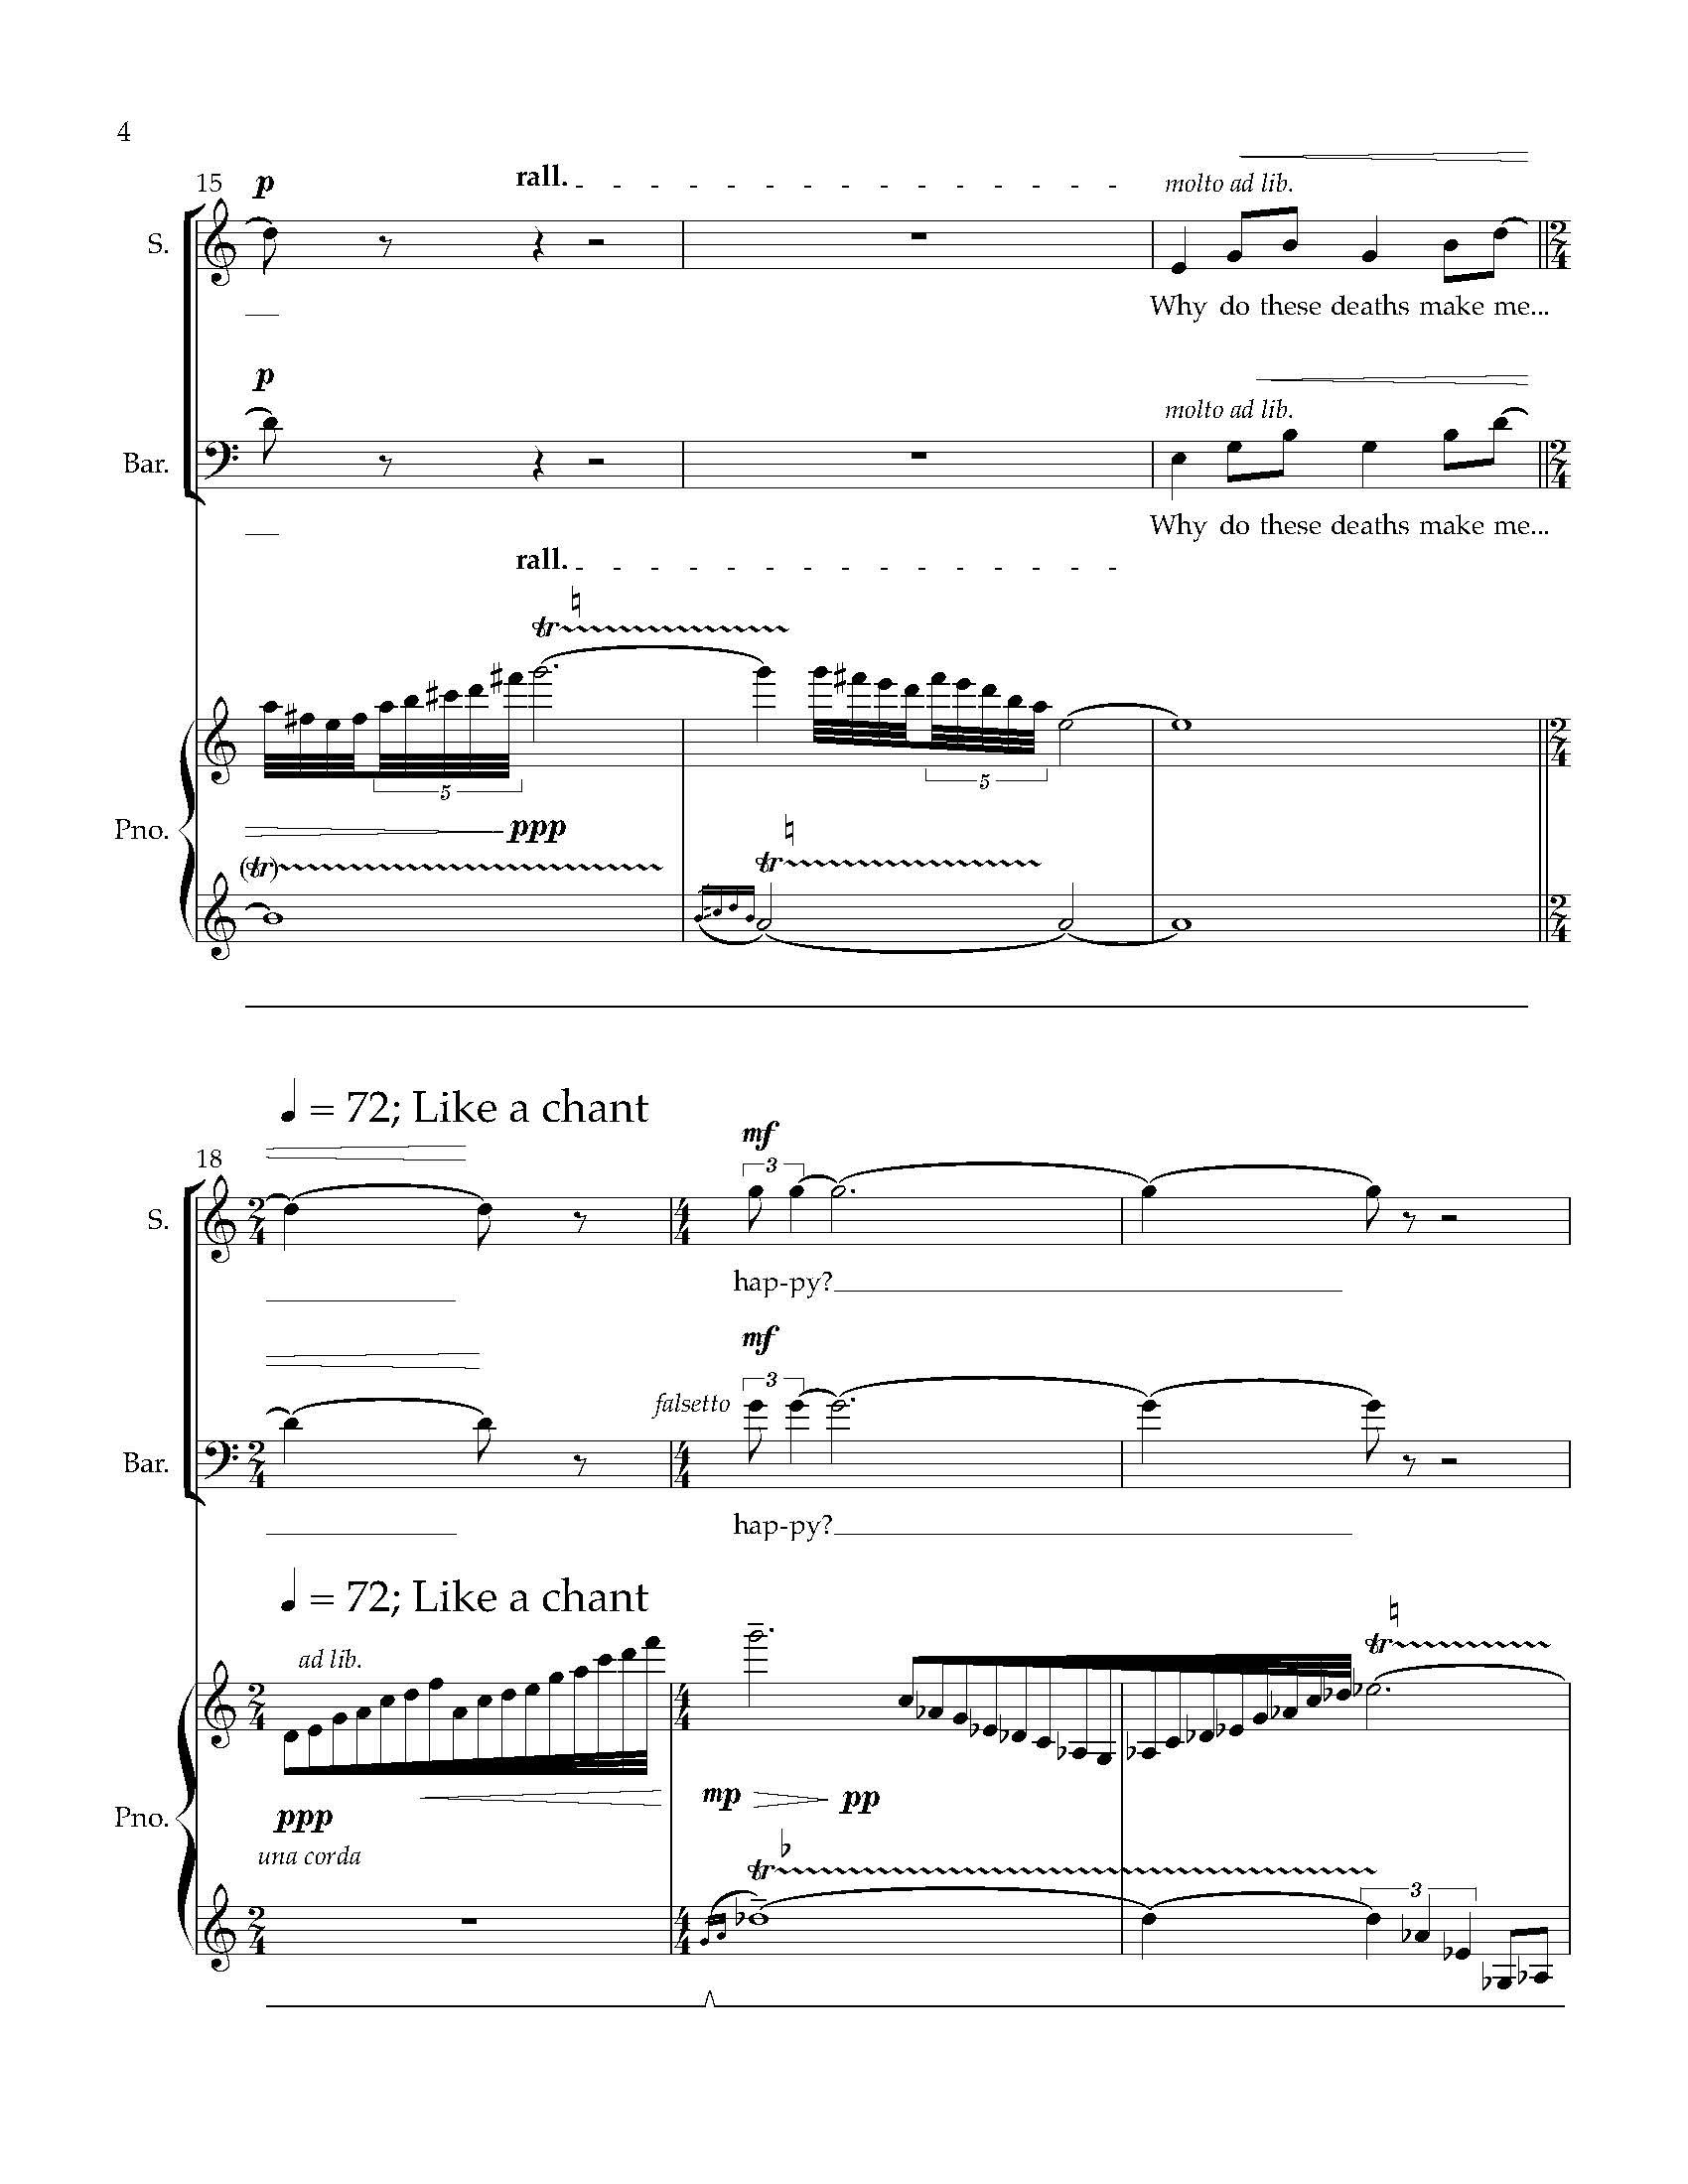 Sky - Complete Score (Revised)_Page_10.jpg